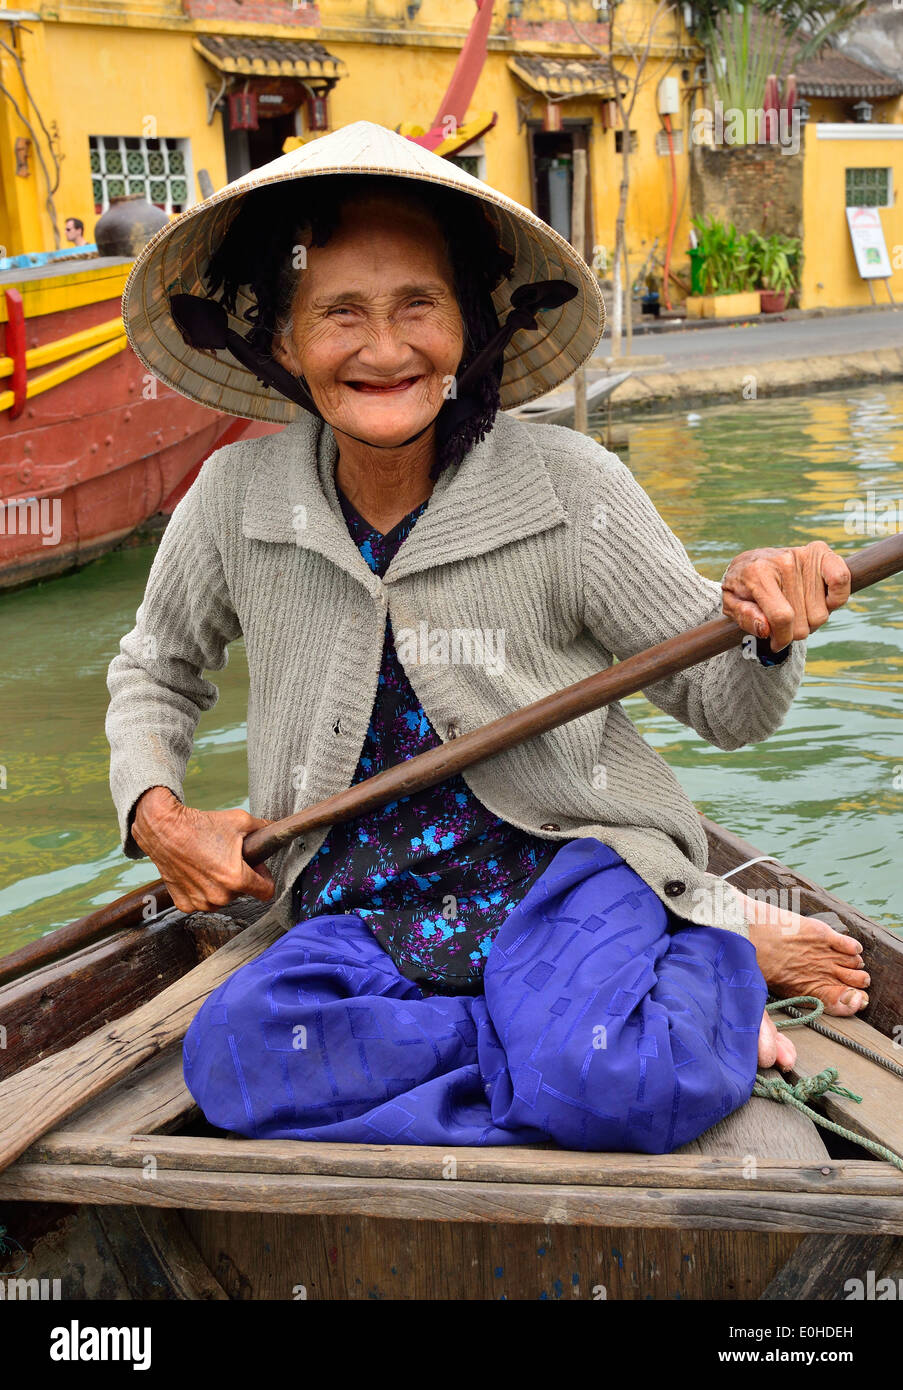 Elderly smiling Vietnamese woman taking tourists for  rides on the river in the town of Hoi An, Vietnam paddling from the stern of her river boat. Stock Photo